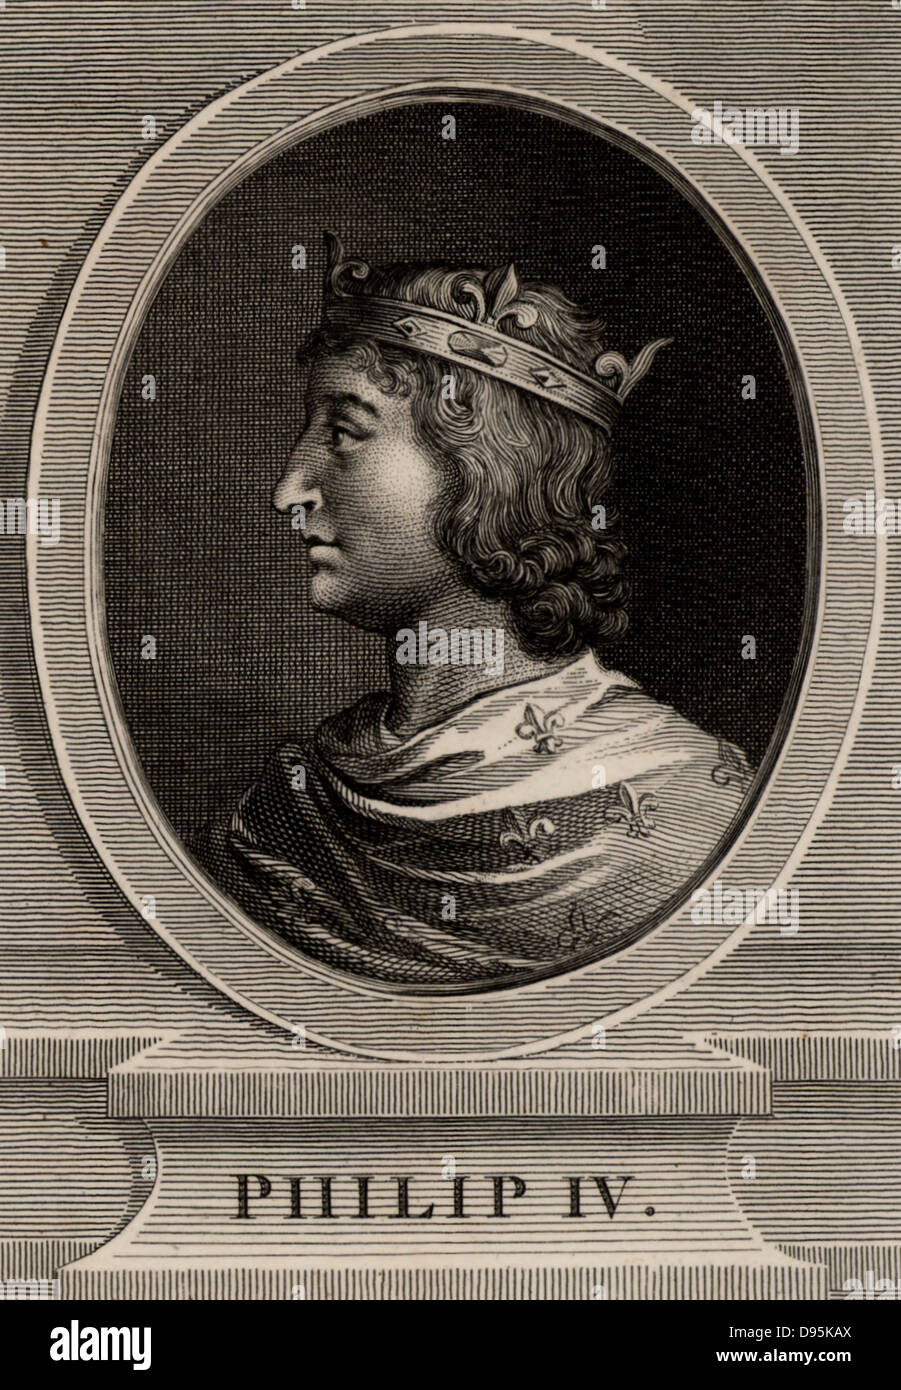 Philip IV, the Fair (1268-1314) a member of the Capetian dynasty,  king of France from 1285. He forced  Pope Clement V to dissolve the Knights Templar, and appropriated their property (1314). Copperplate engraving, 1793. Stock Photo